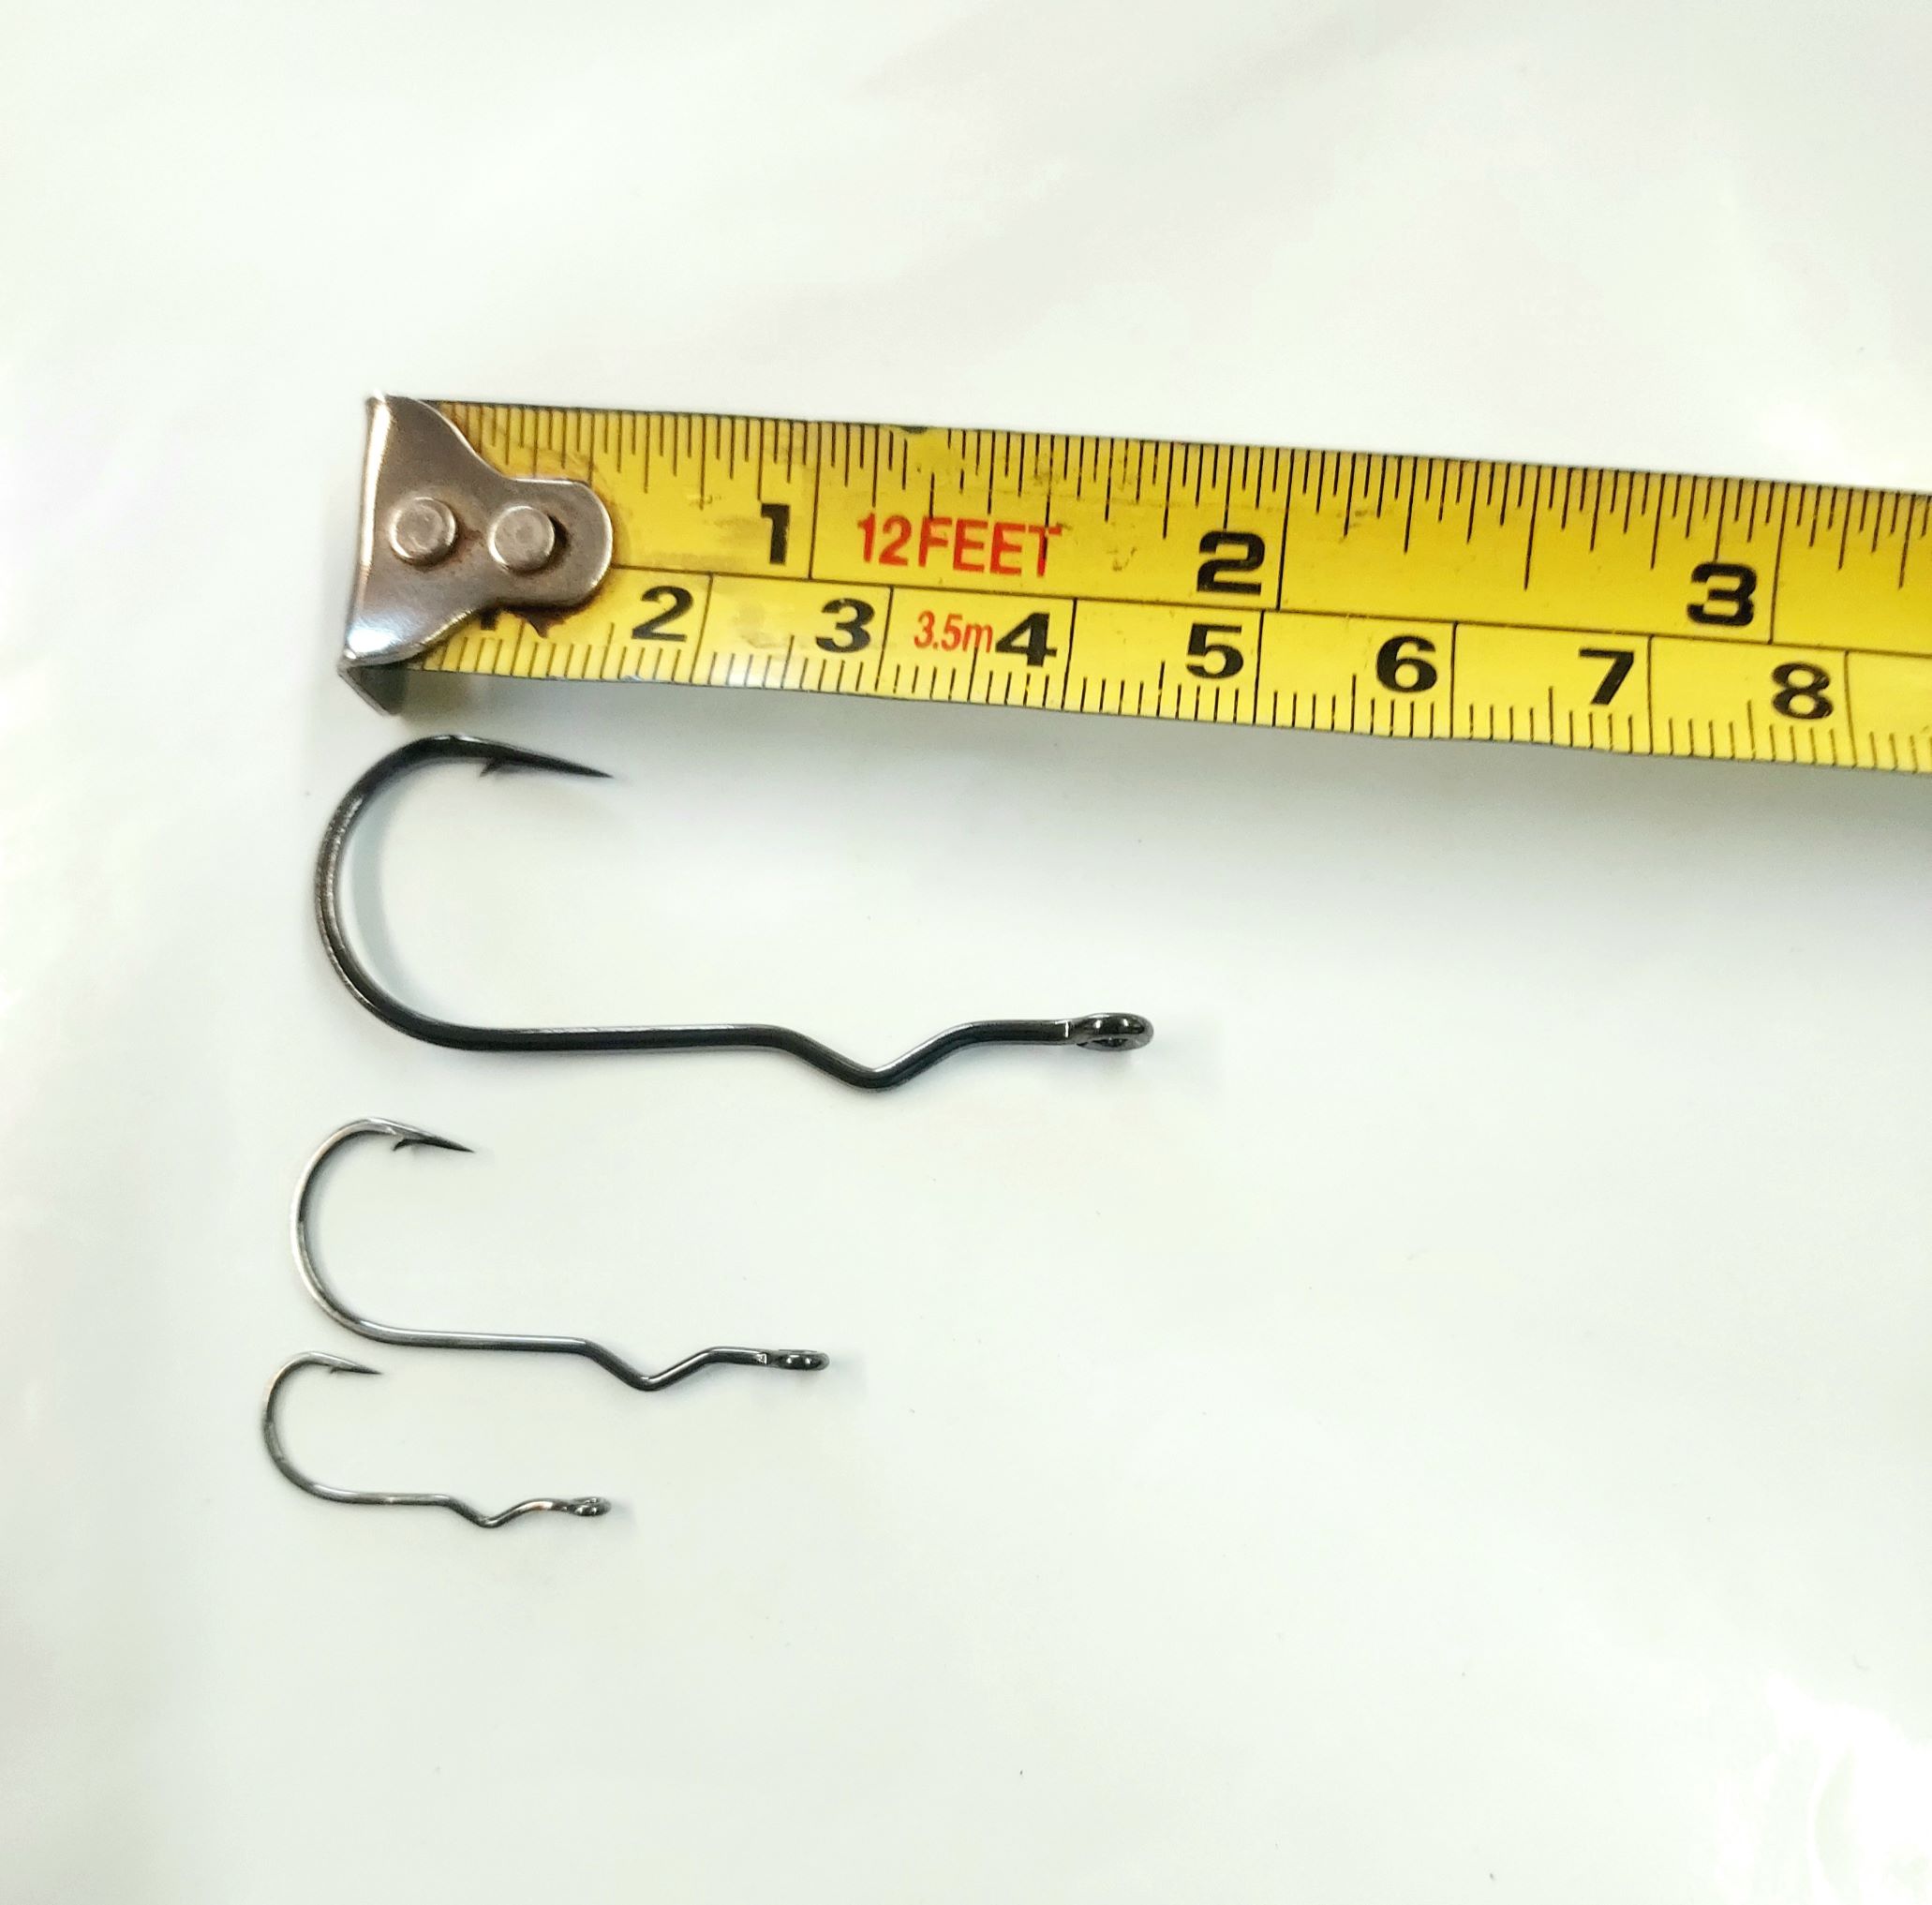 Crappie panfish hooks and for worms. Use for minnows or worms - Get Hooked  Magic Baits